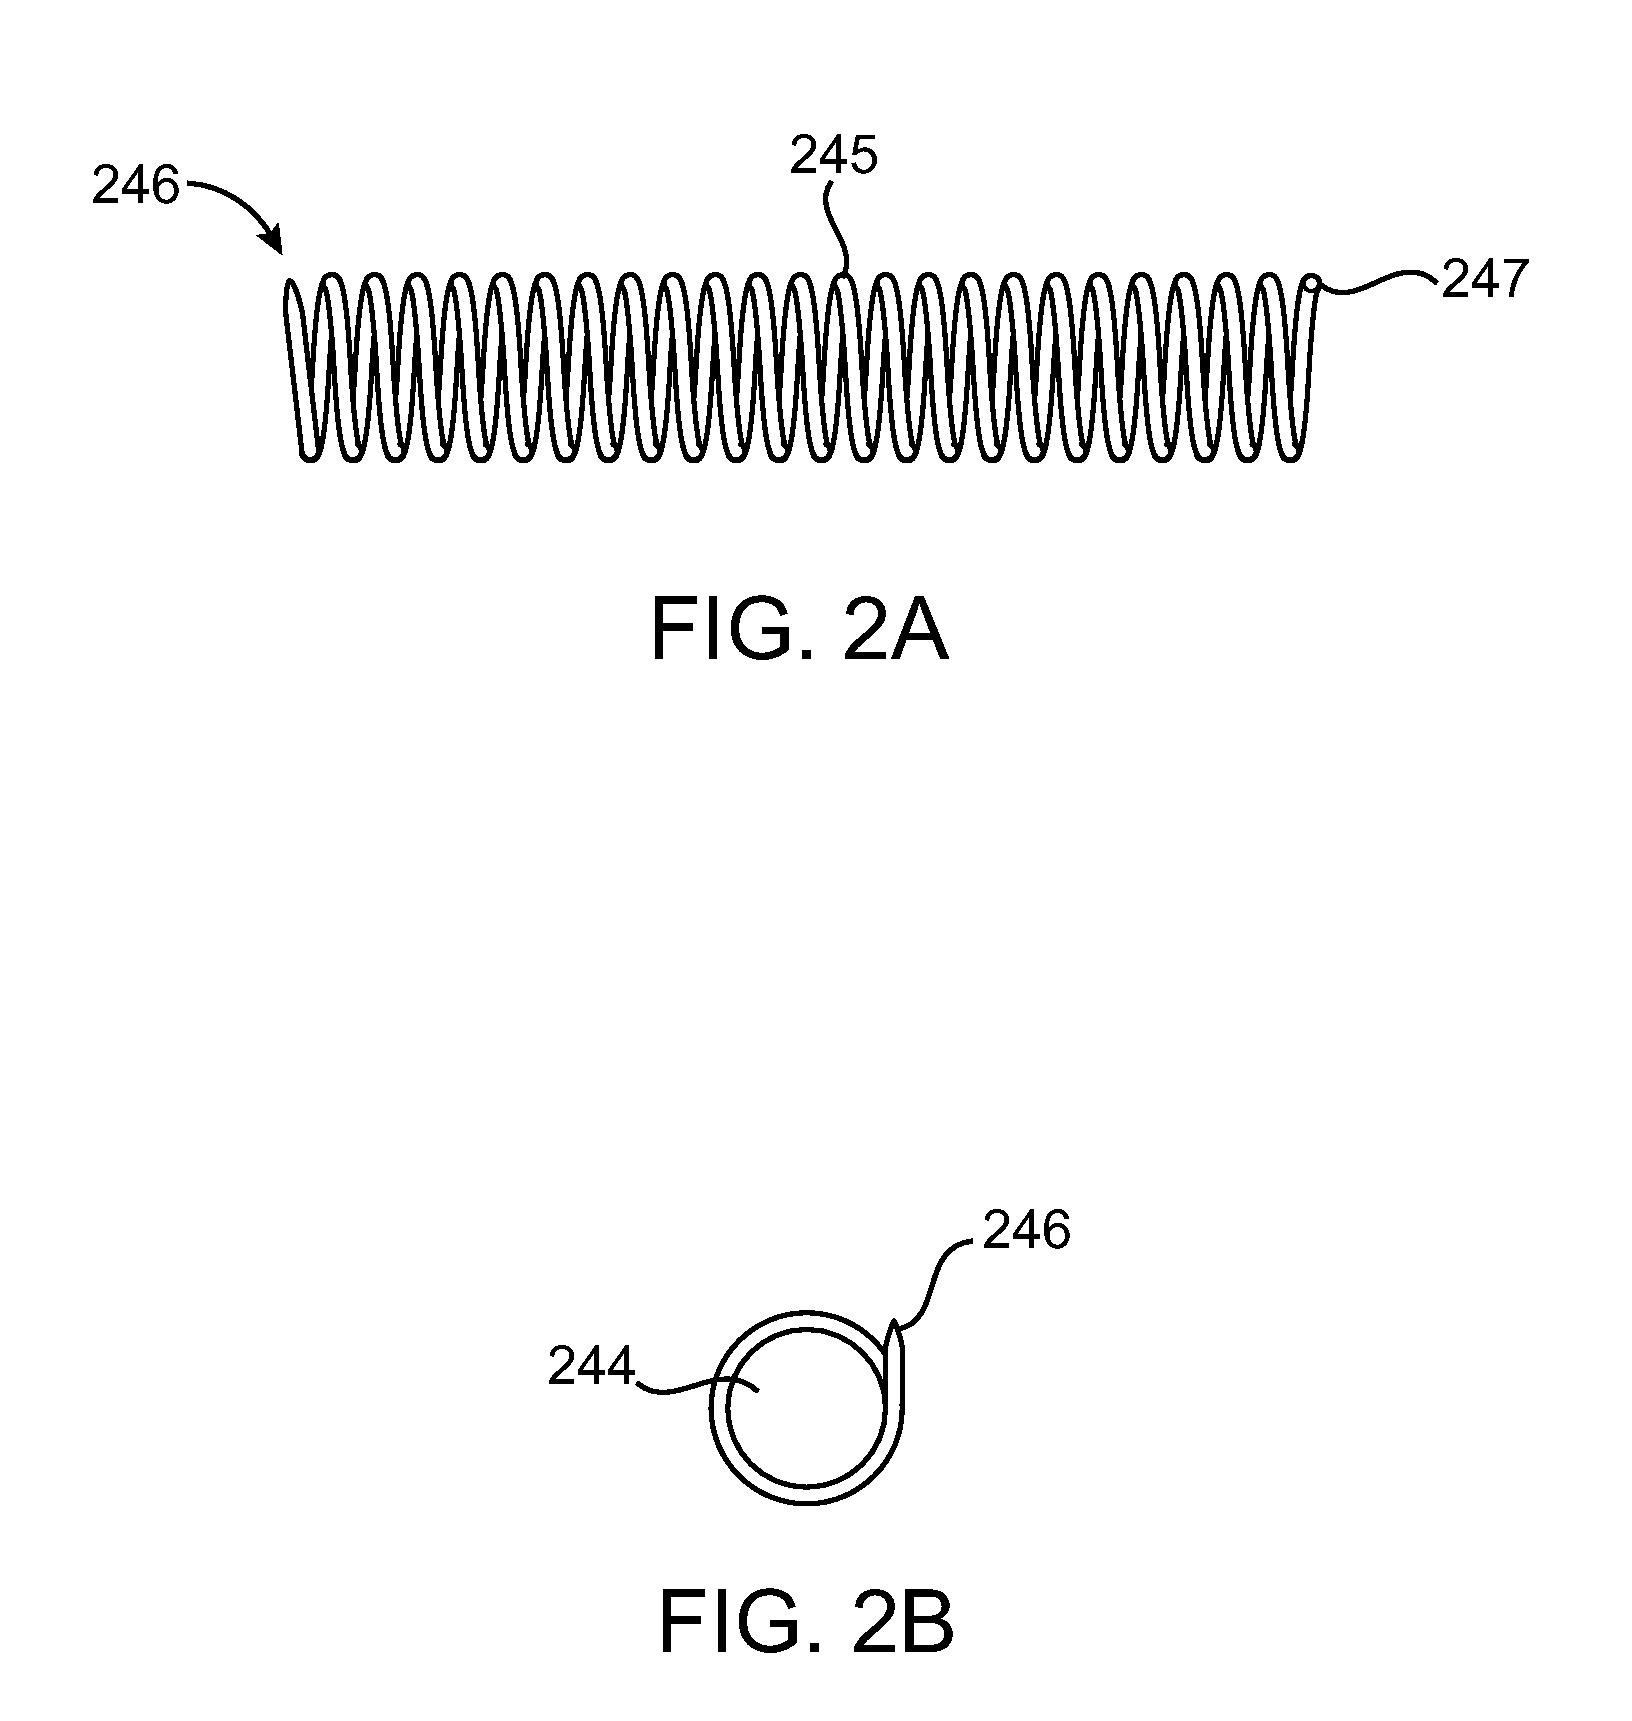 Minimally Invasive Procedure for Implanting an Annuloplasty Device